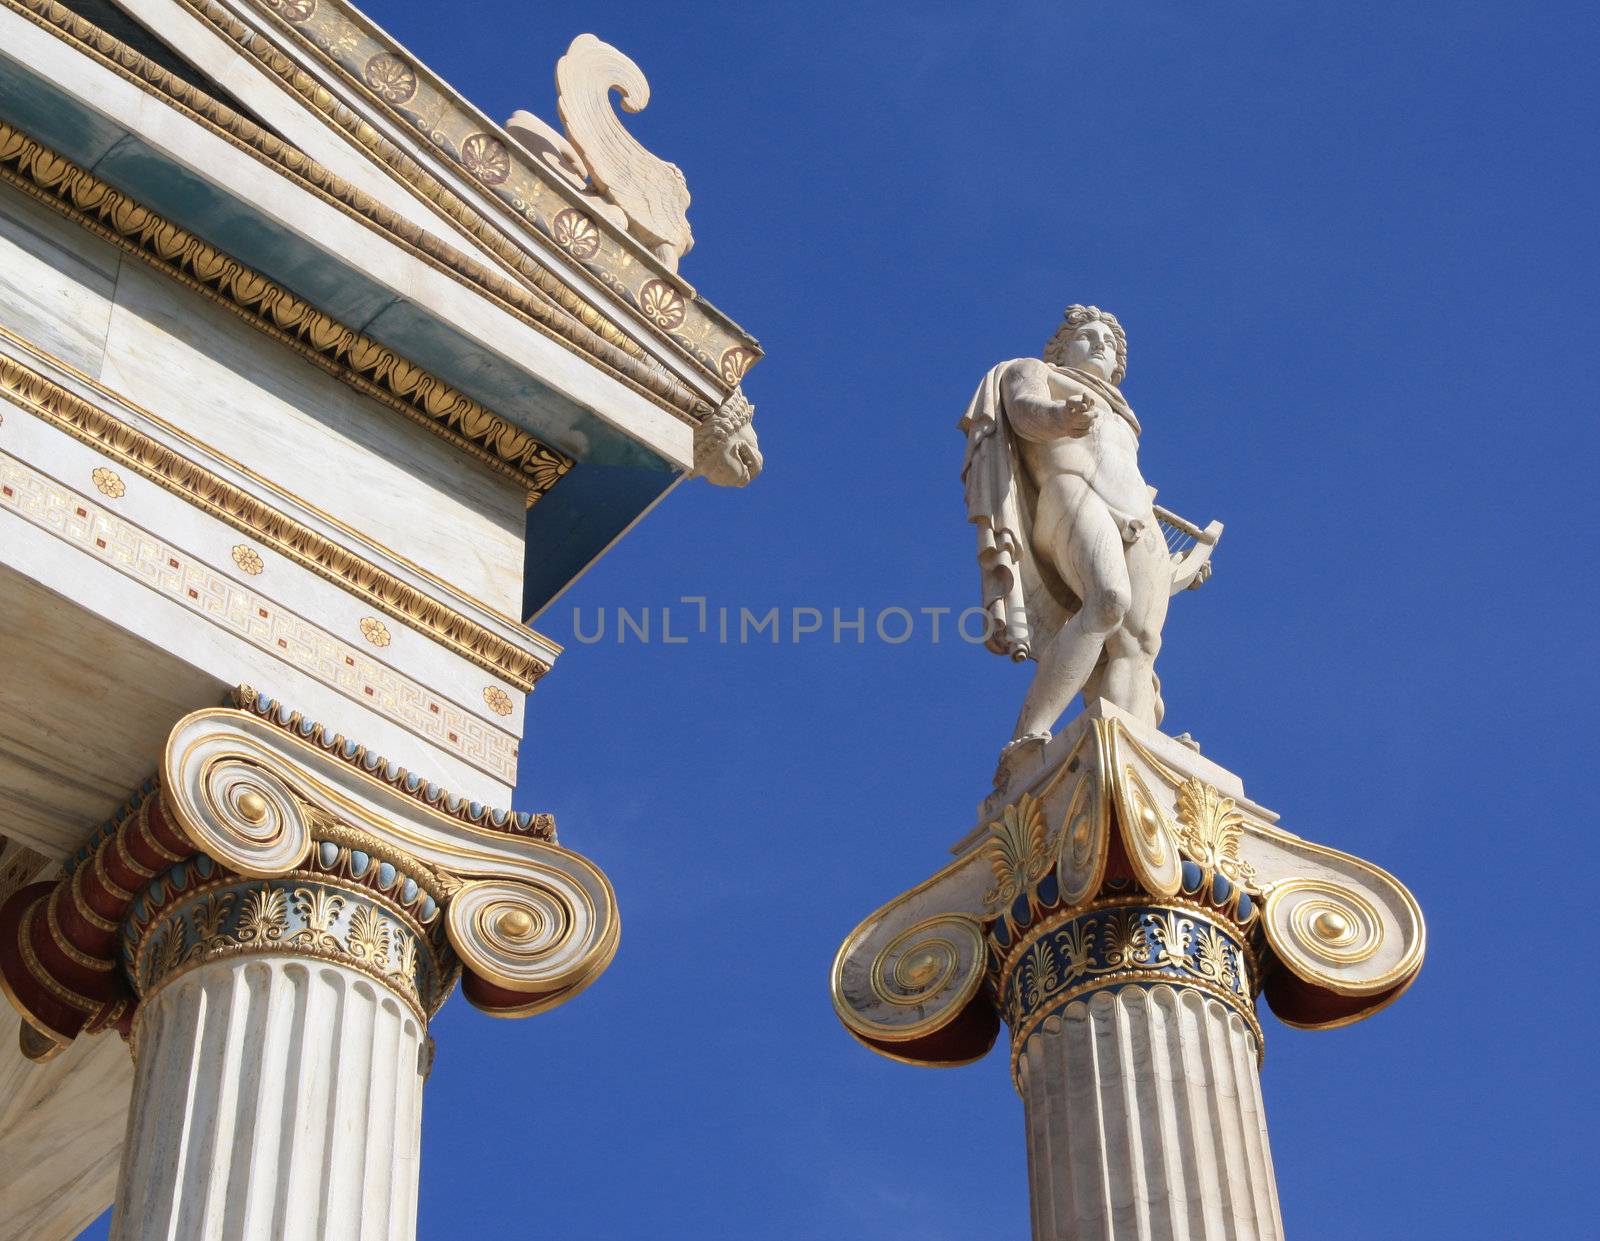 Neoclassical statue of ancient Greek good, Apollo, outside Academy of Athens, Greece. Apollo was the god of light and the sun, truth and prophecy, archery, medicine and healing, music, poetry and the arts. 